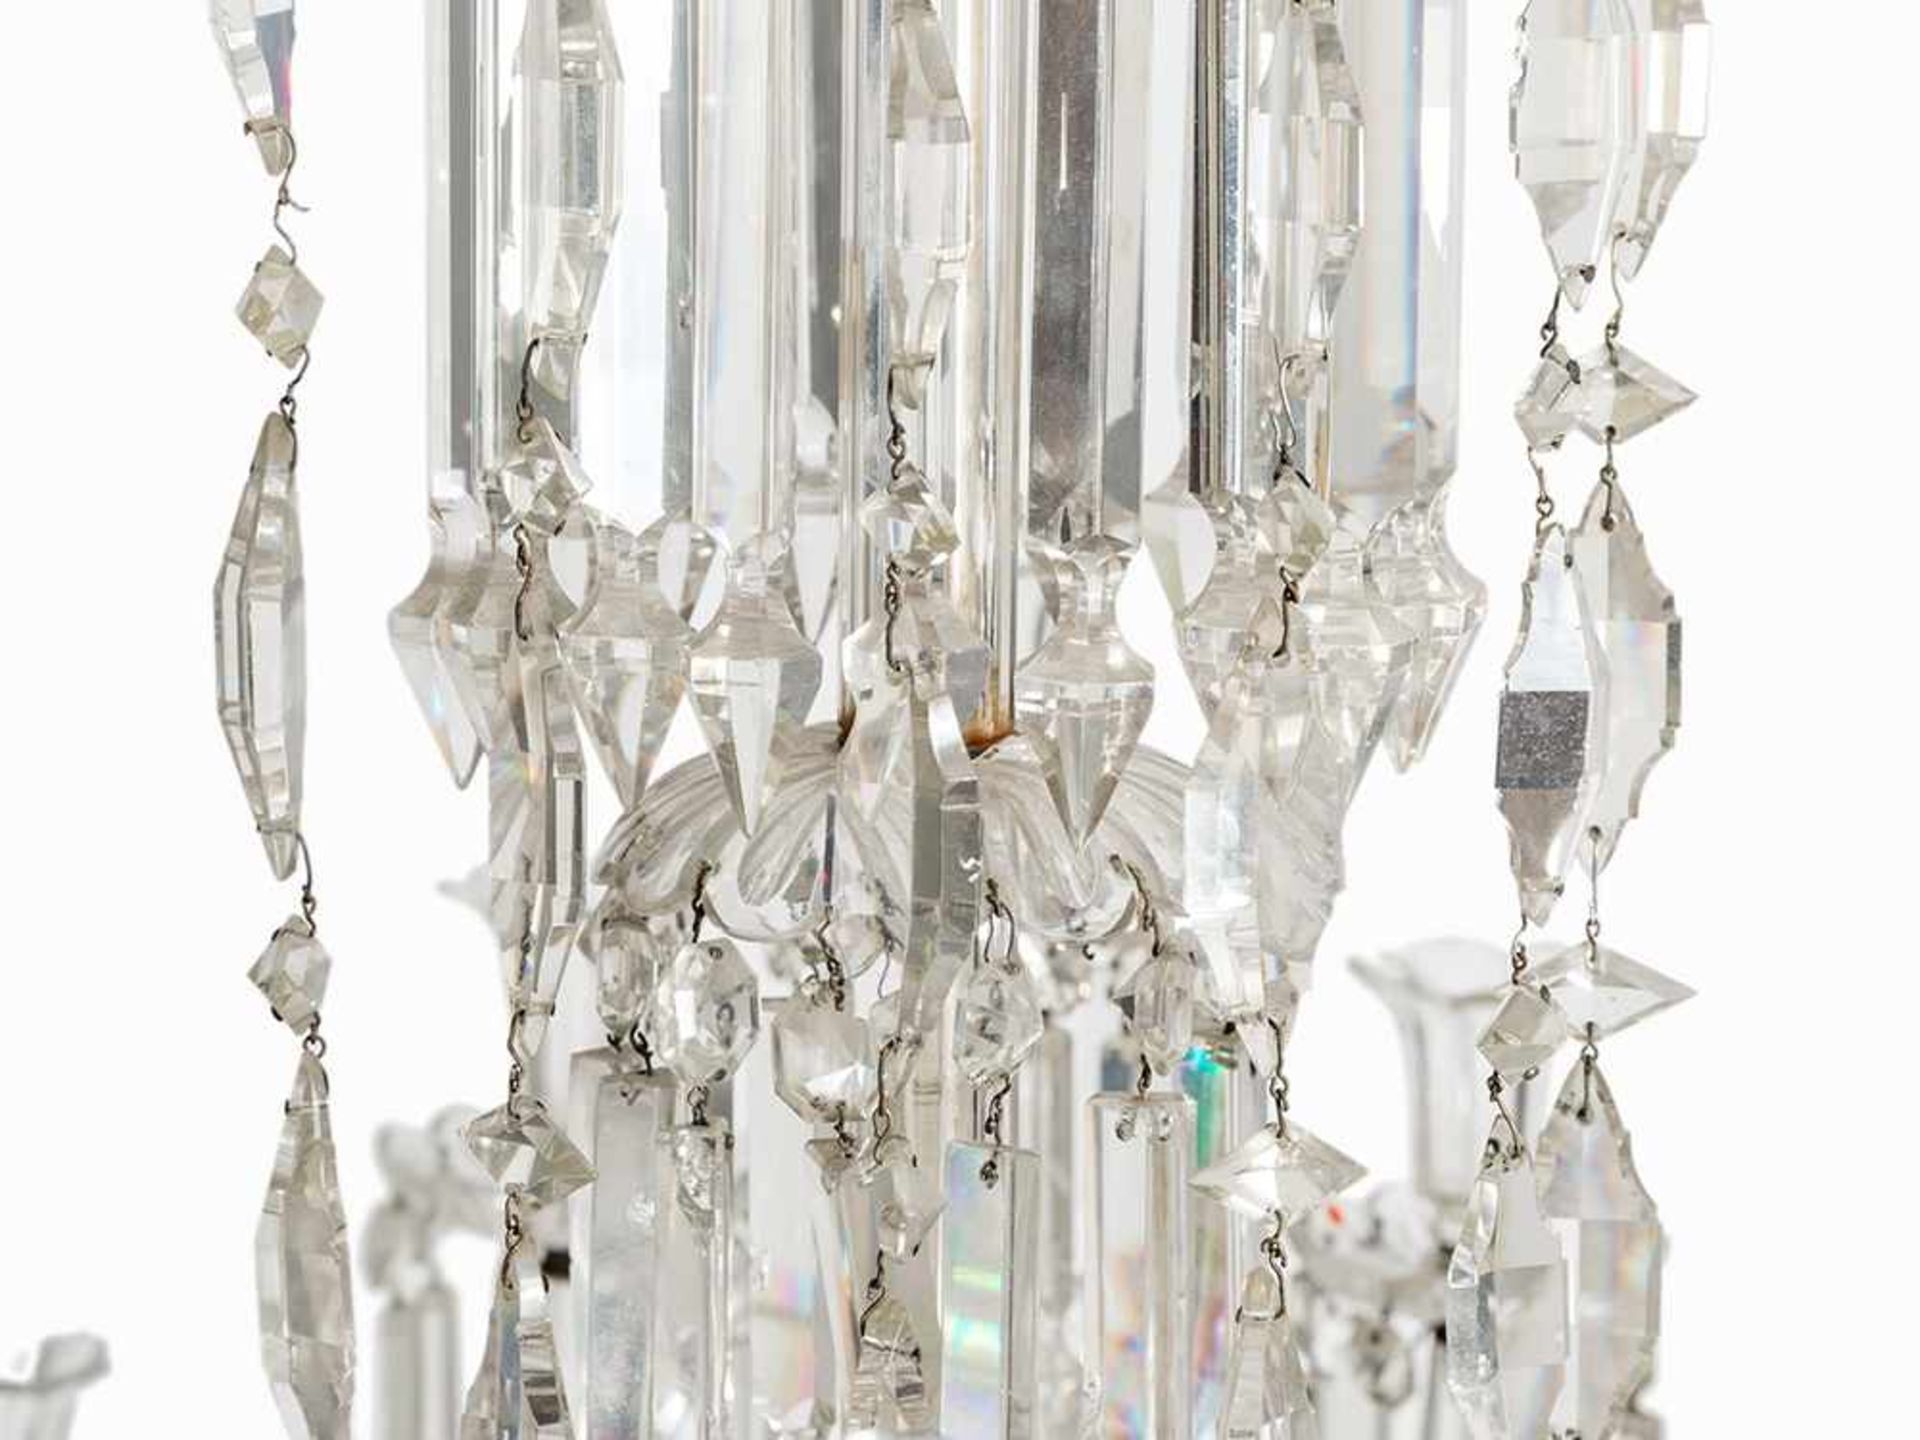 Magnificent Baccarat Chandelier, France, 19th C. Baccarat crystal France, 19th century 30 electric - Image 9 of 10